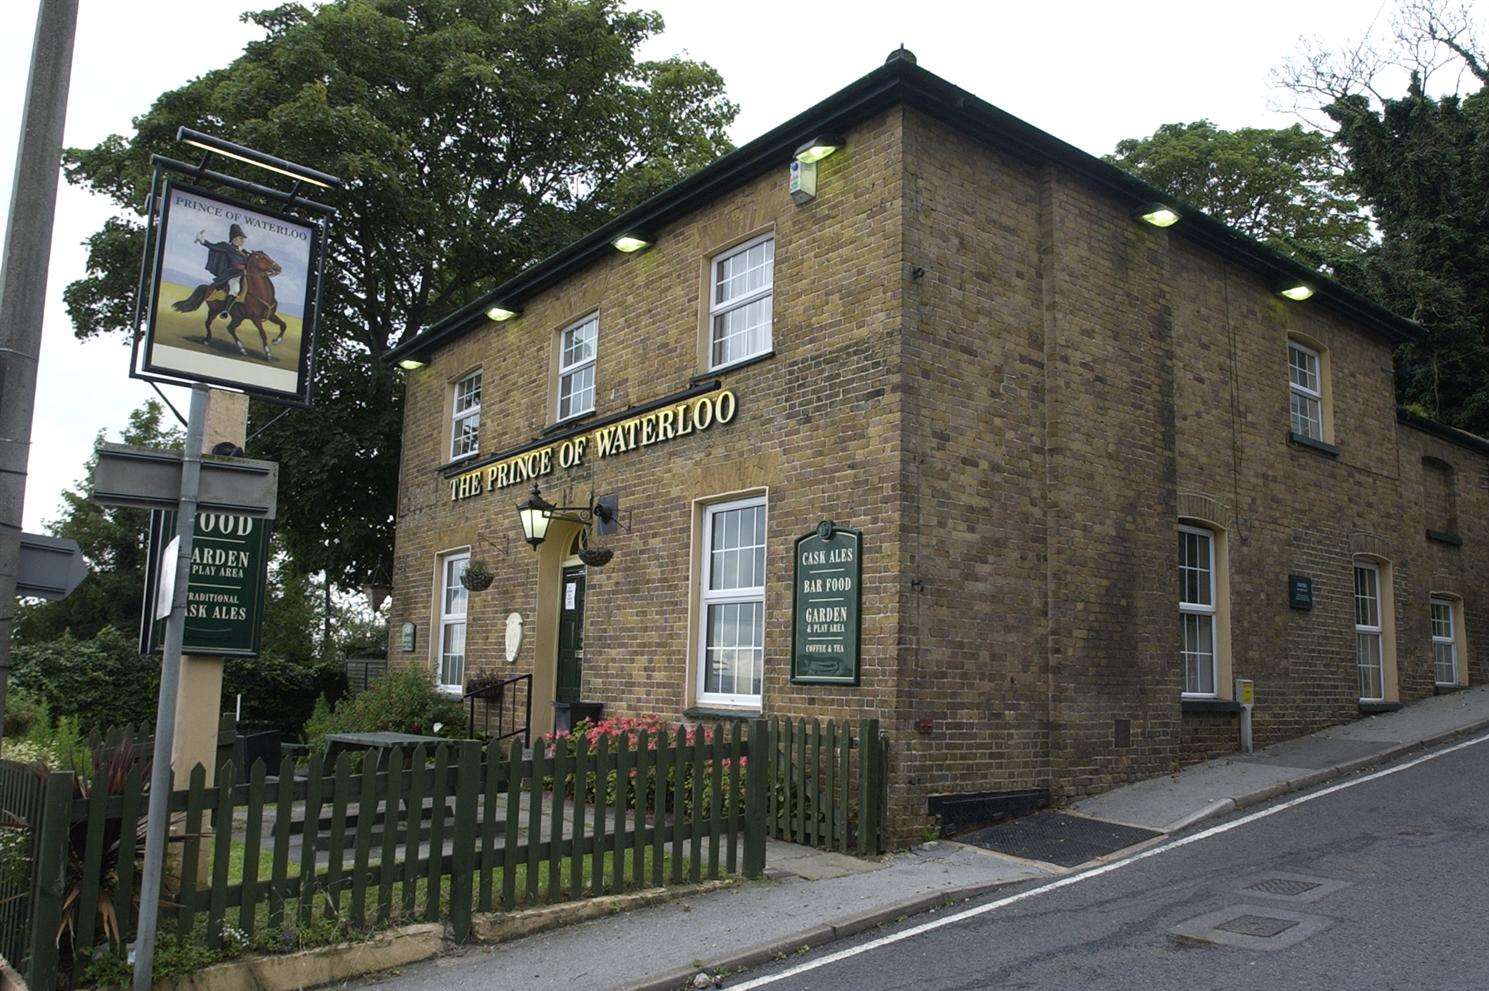 The Prince of Waterloo pub pictured in 2007.